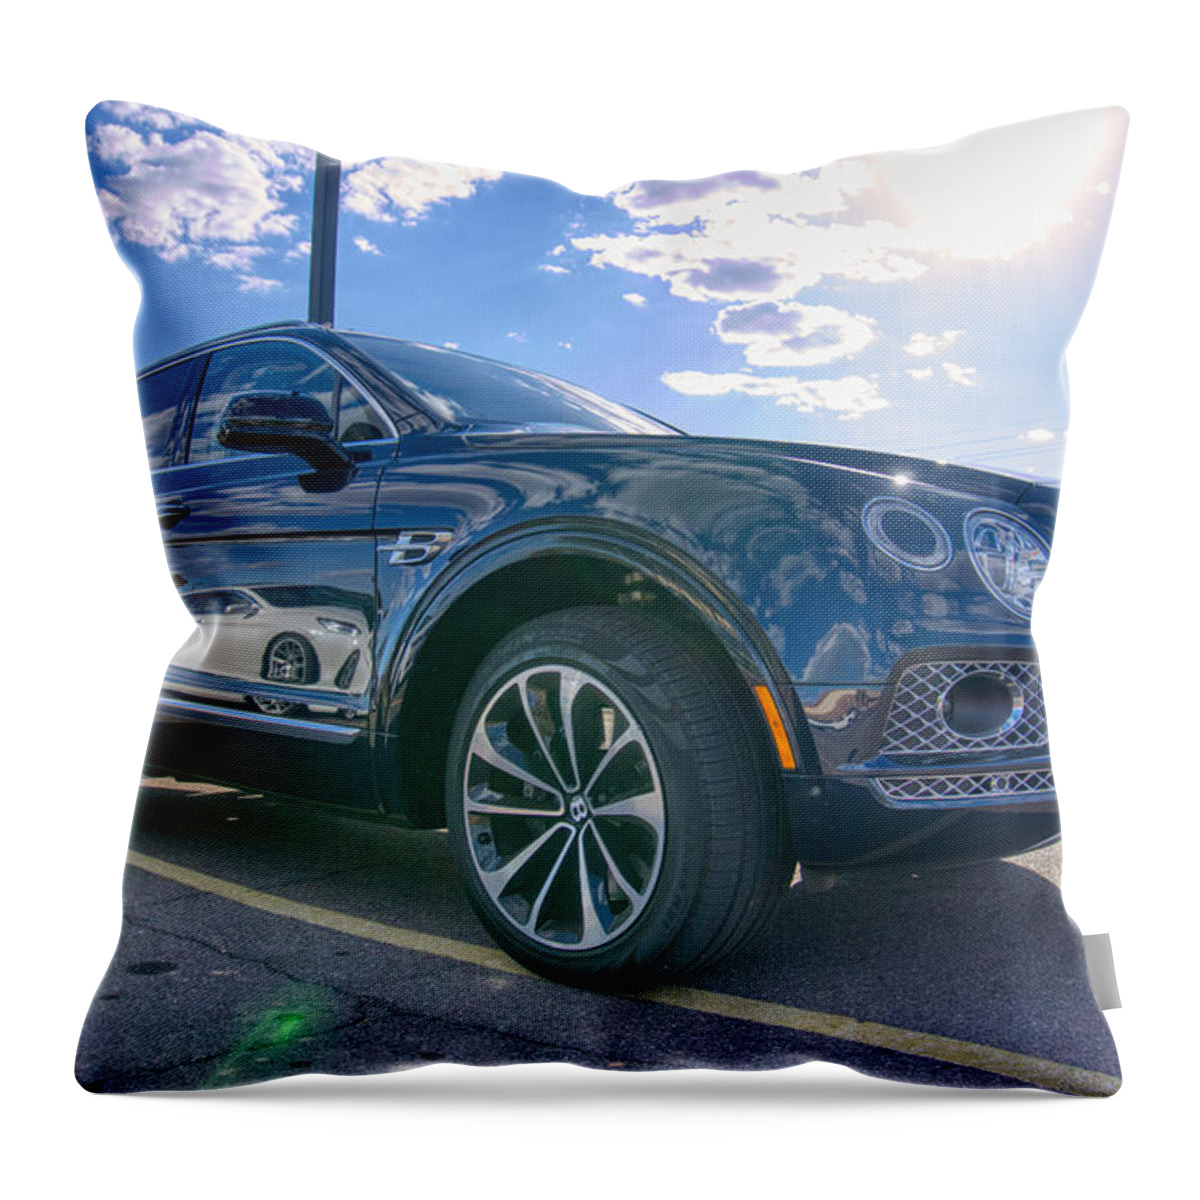 Bentley Throw Pillow featuring the photograph Bentley Bentayga by Anthony Giammarino